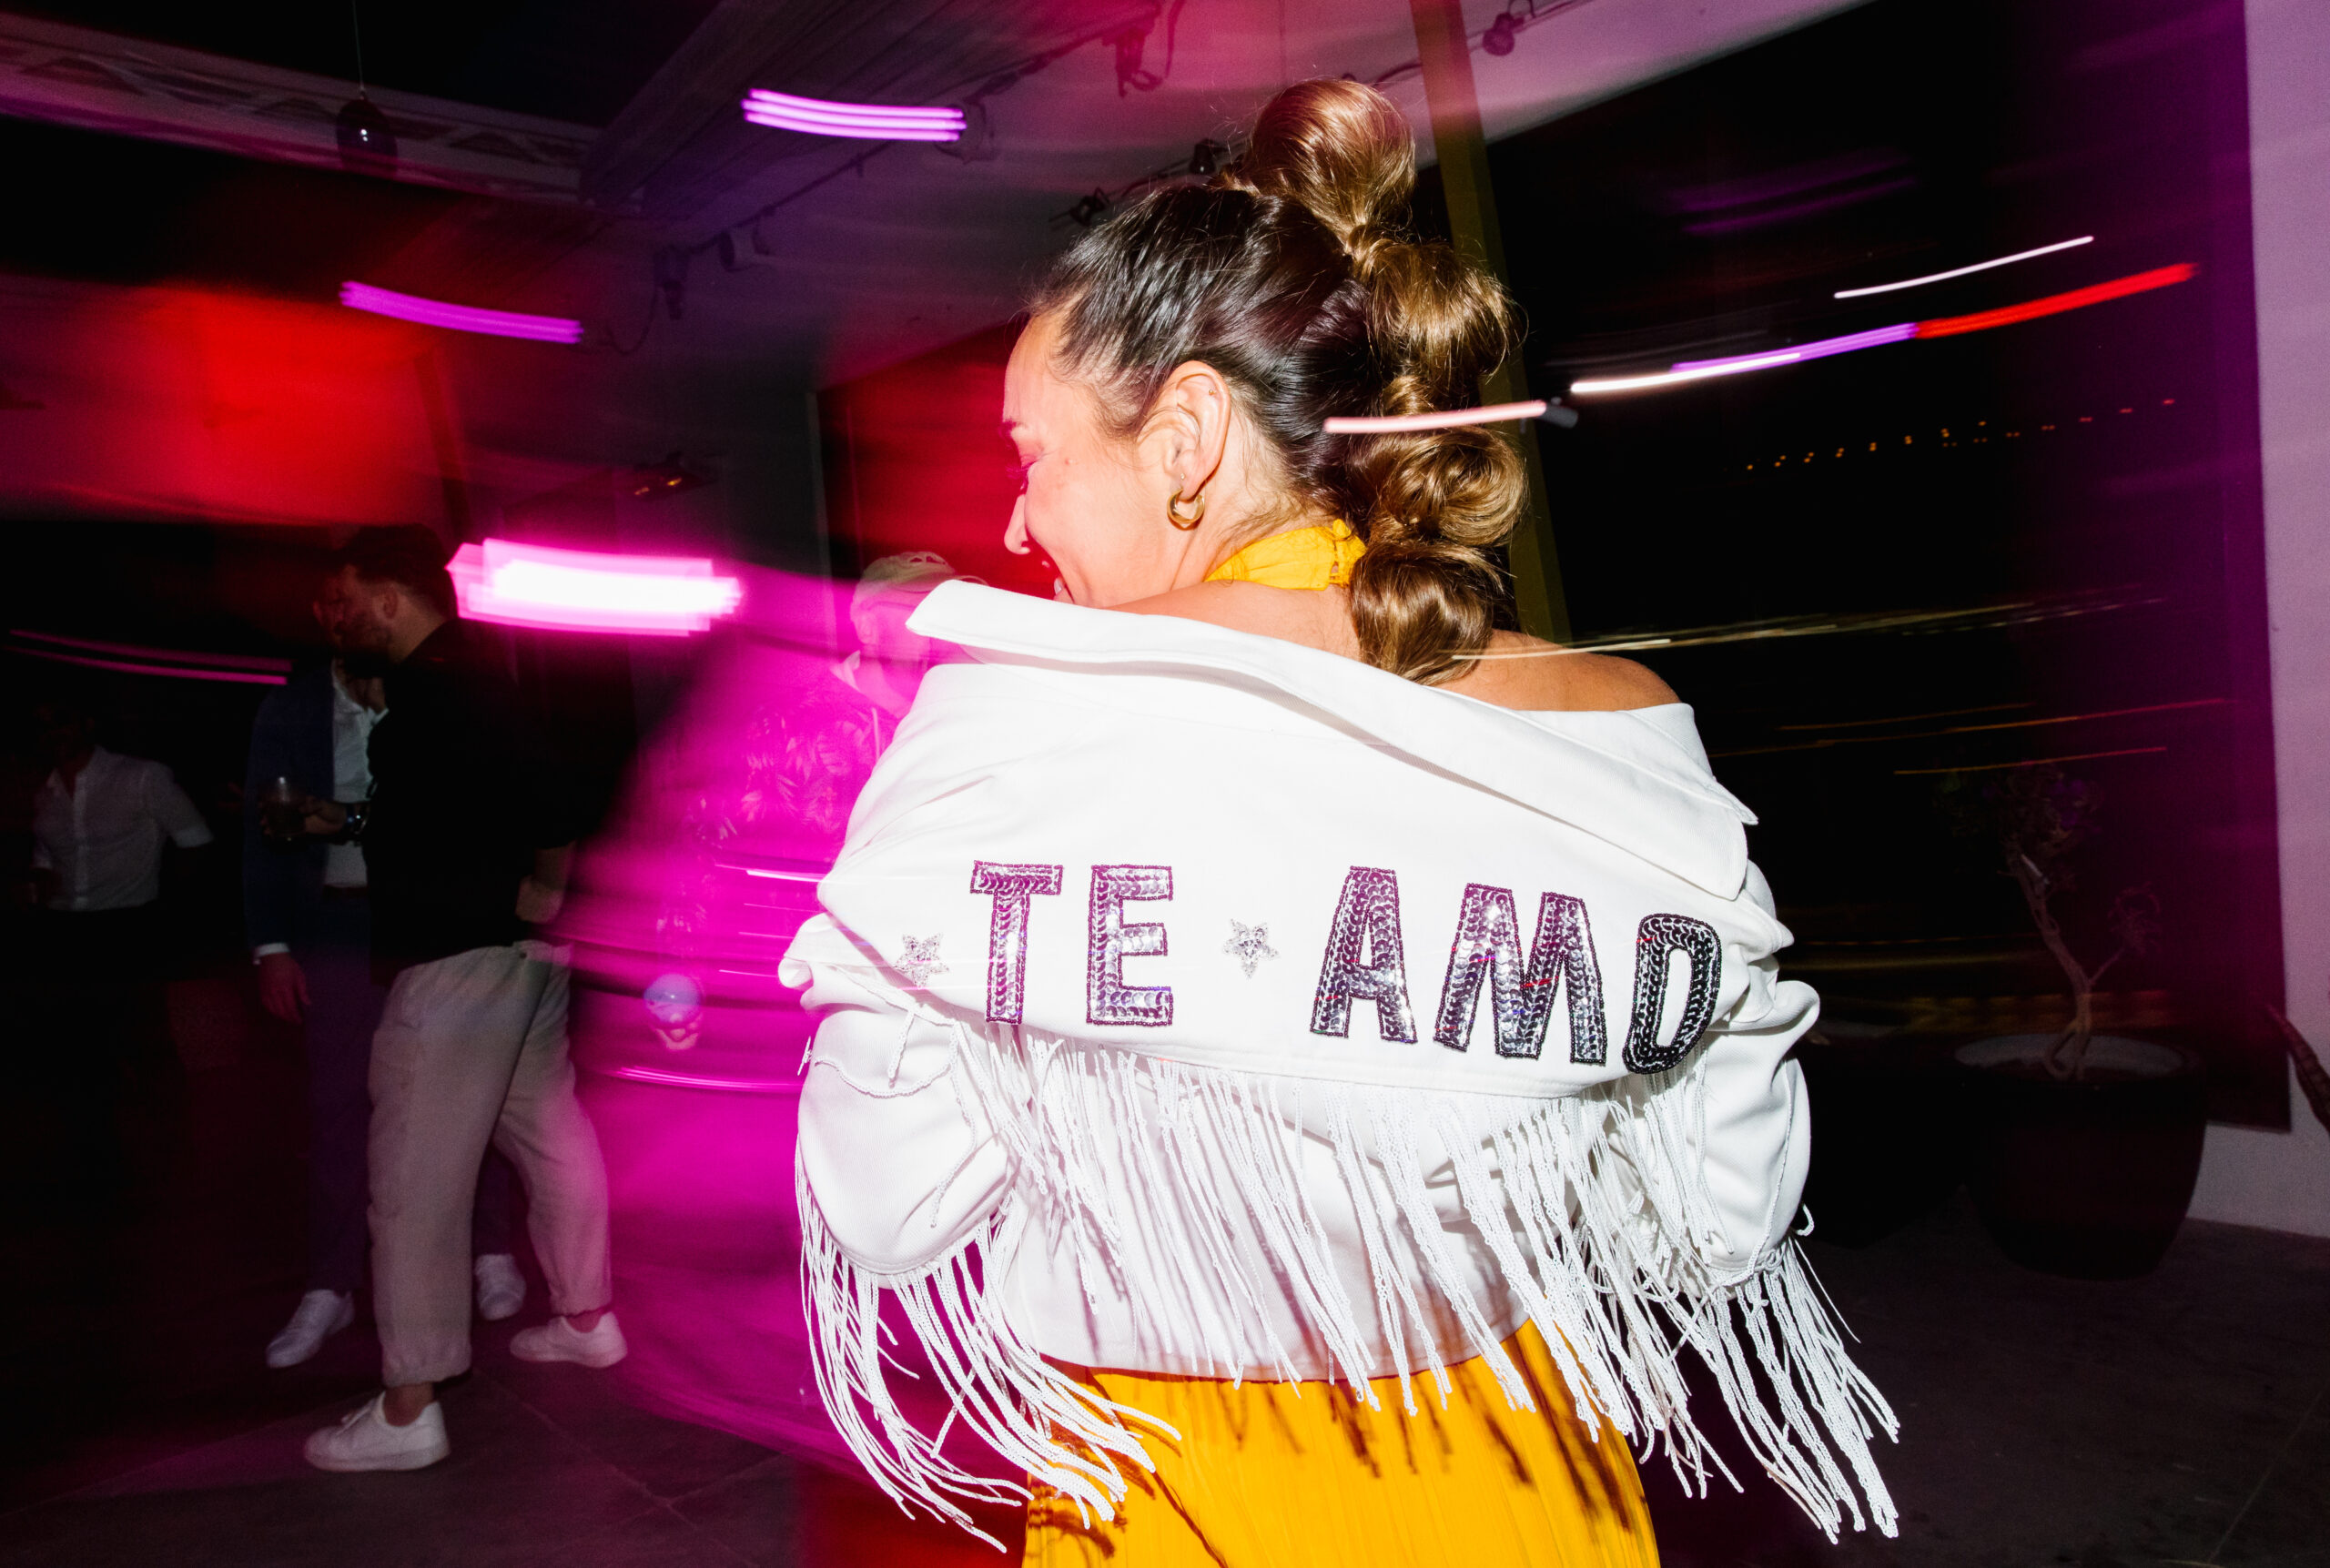 blurry photo style te amo bridal jacket with white fringe yellow after party dress high bubble pony tail wedding dance party